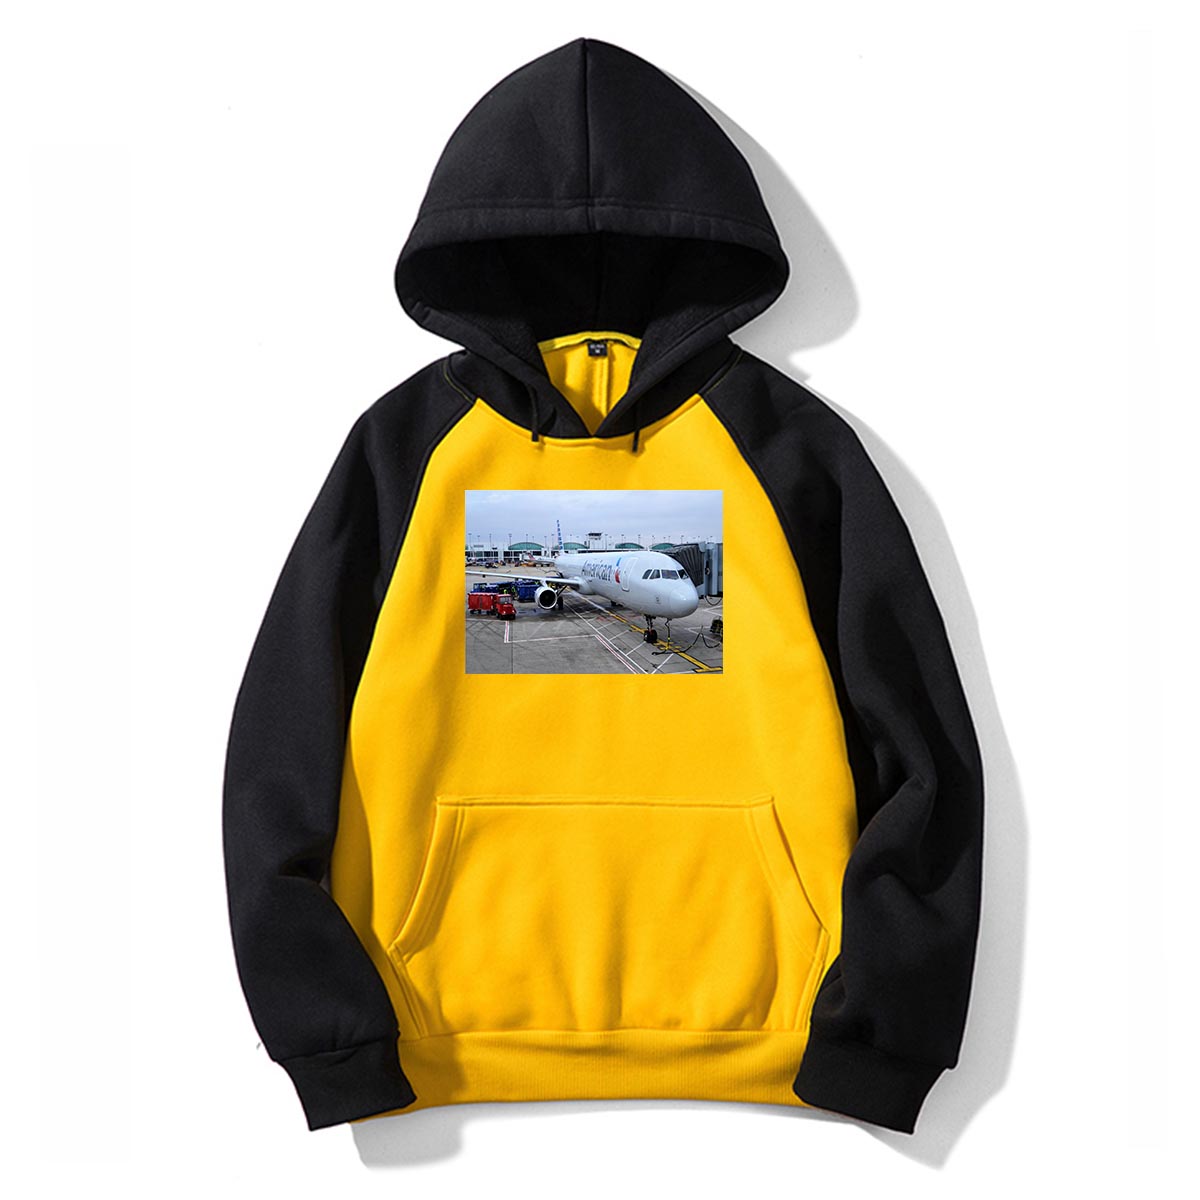 American Airlines A321 Designed Colourful Hoodies